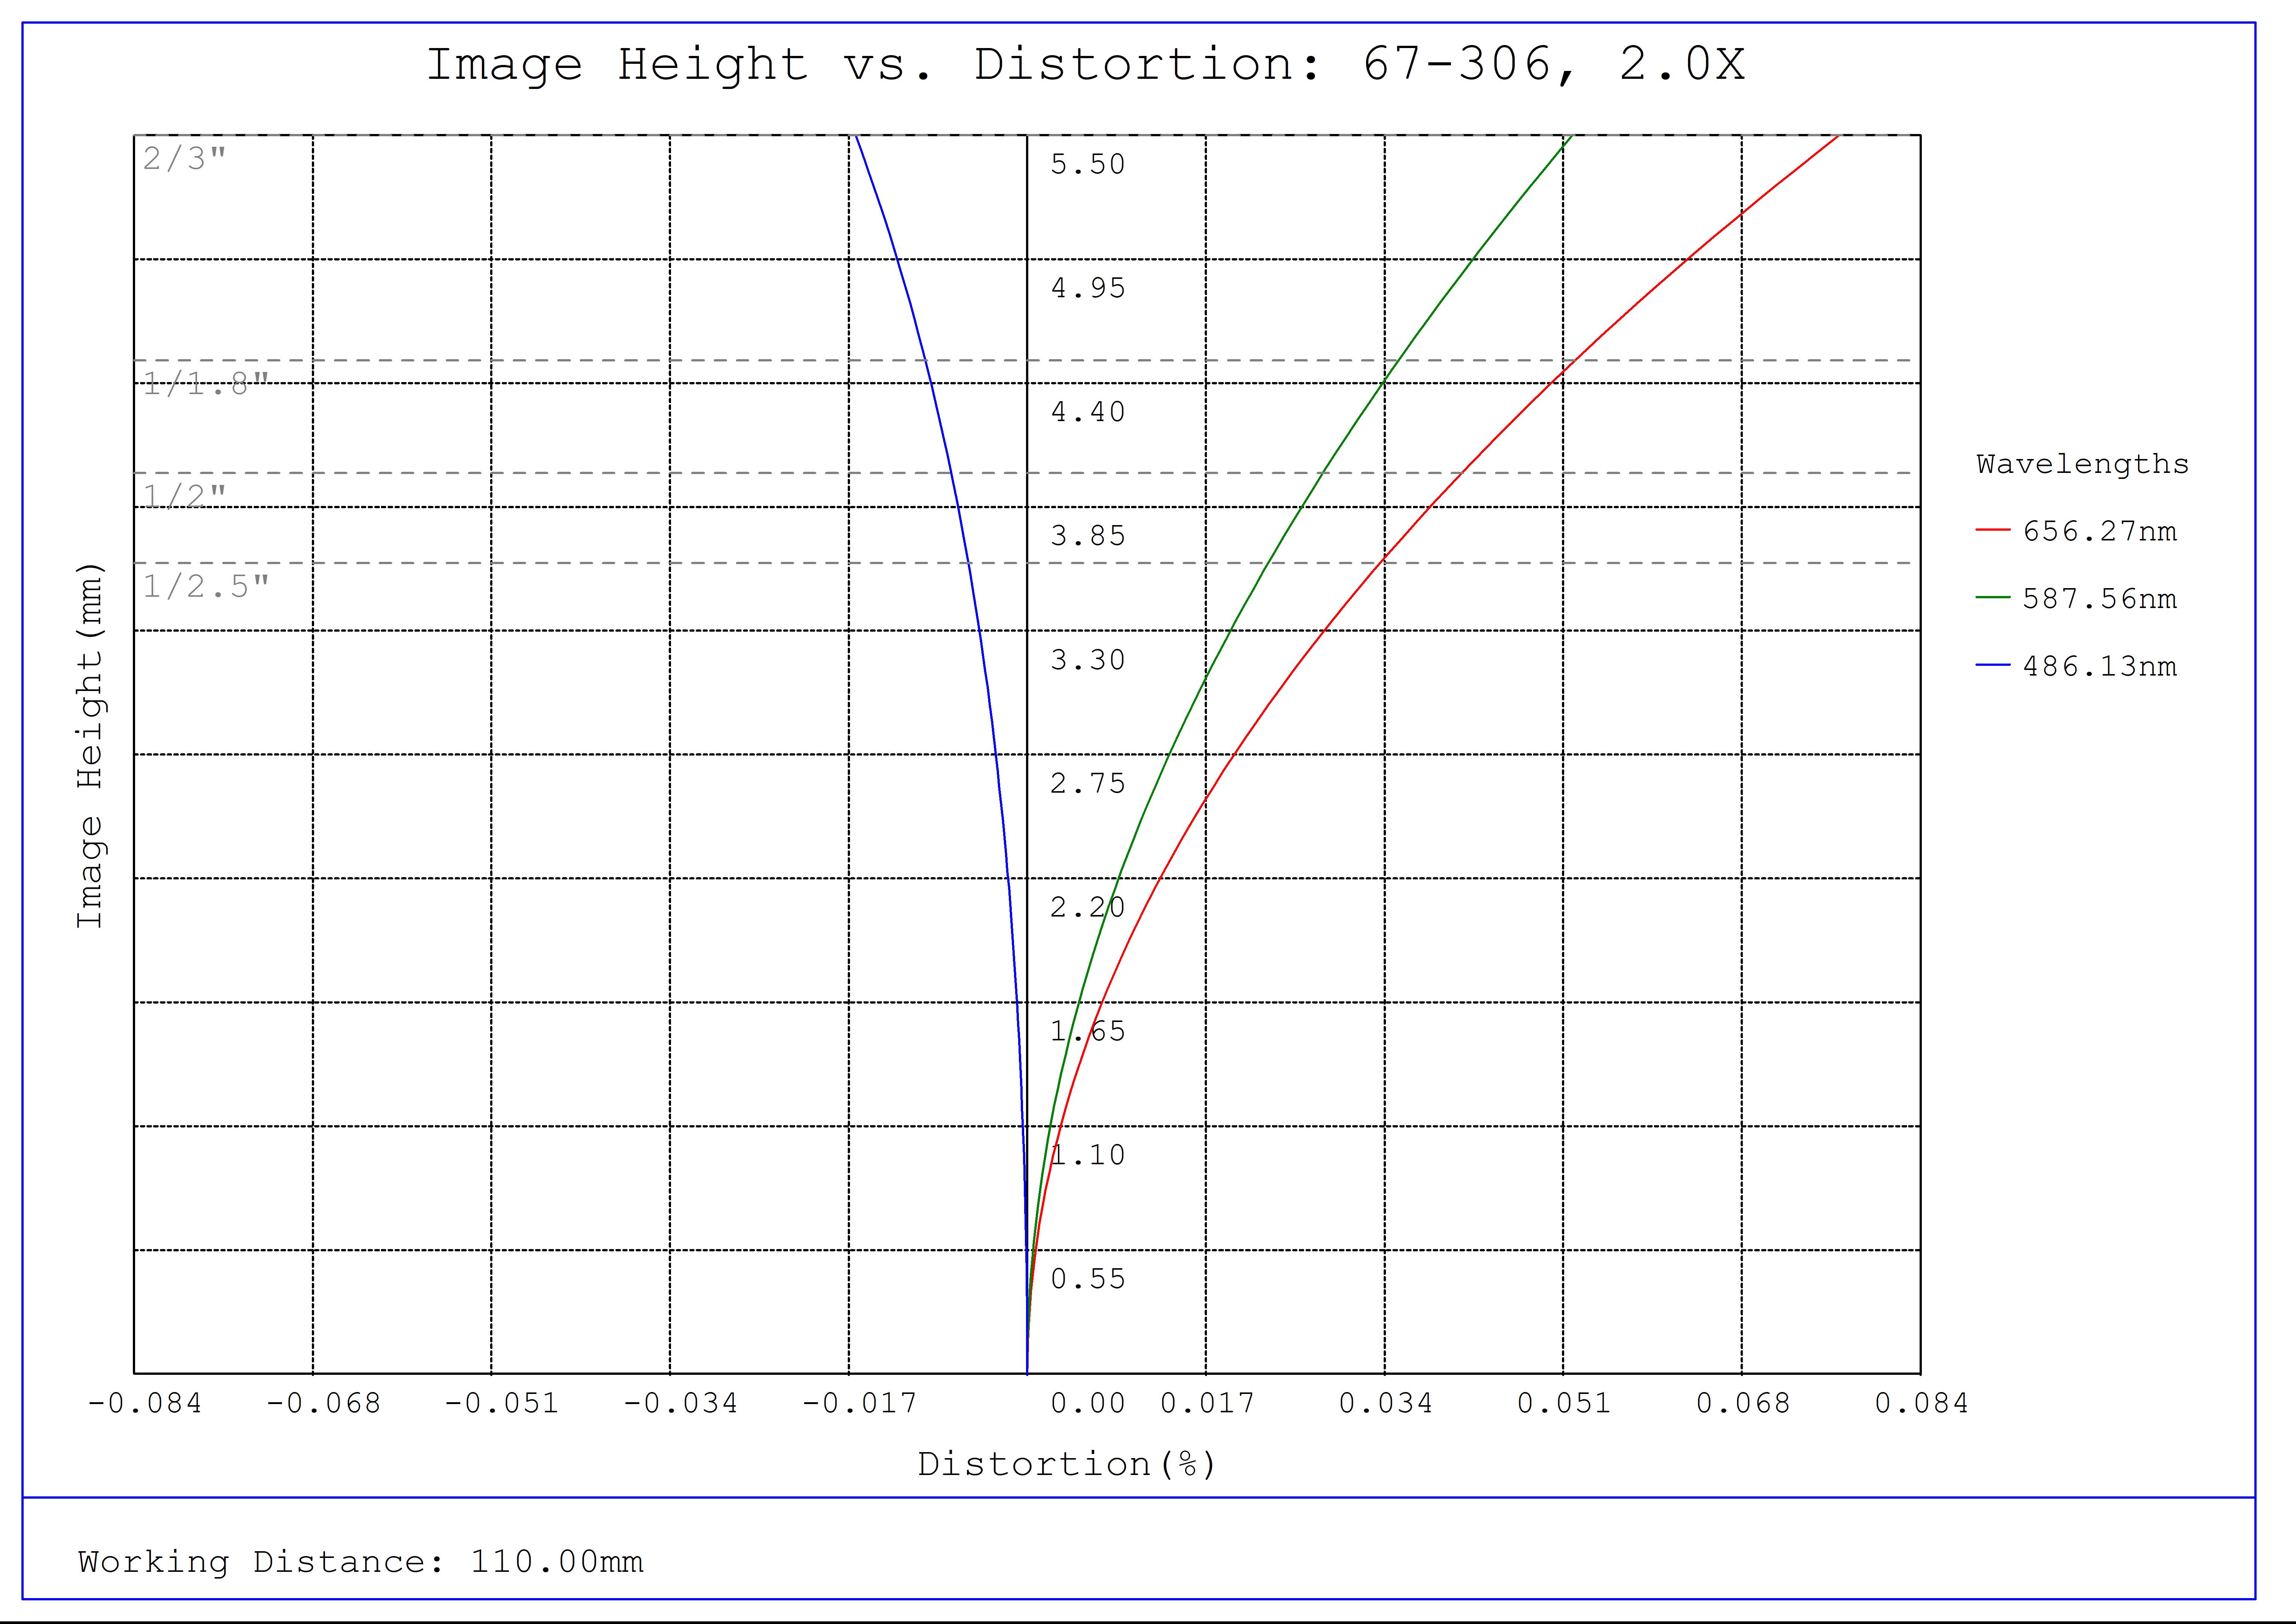 #67-306, 2X, 110mm WD, In-Line CompactTL™ Telecentric Lens, Distortion Plot